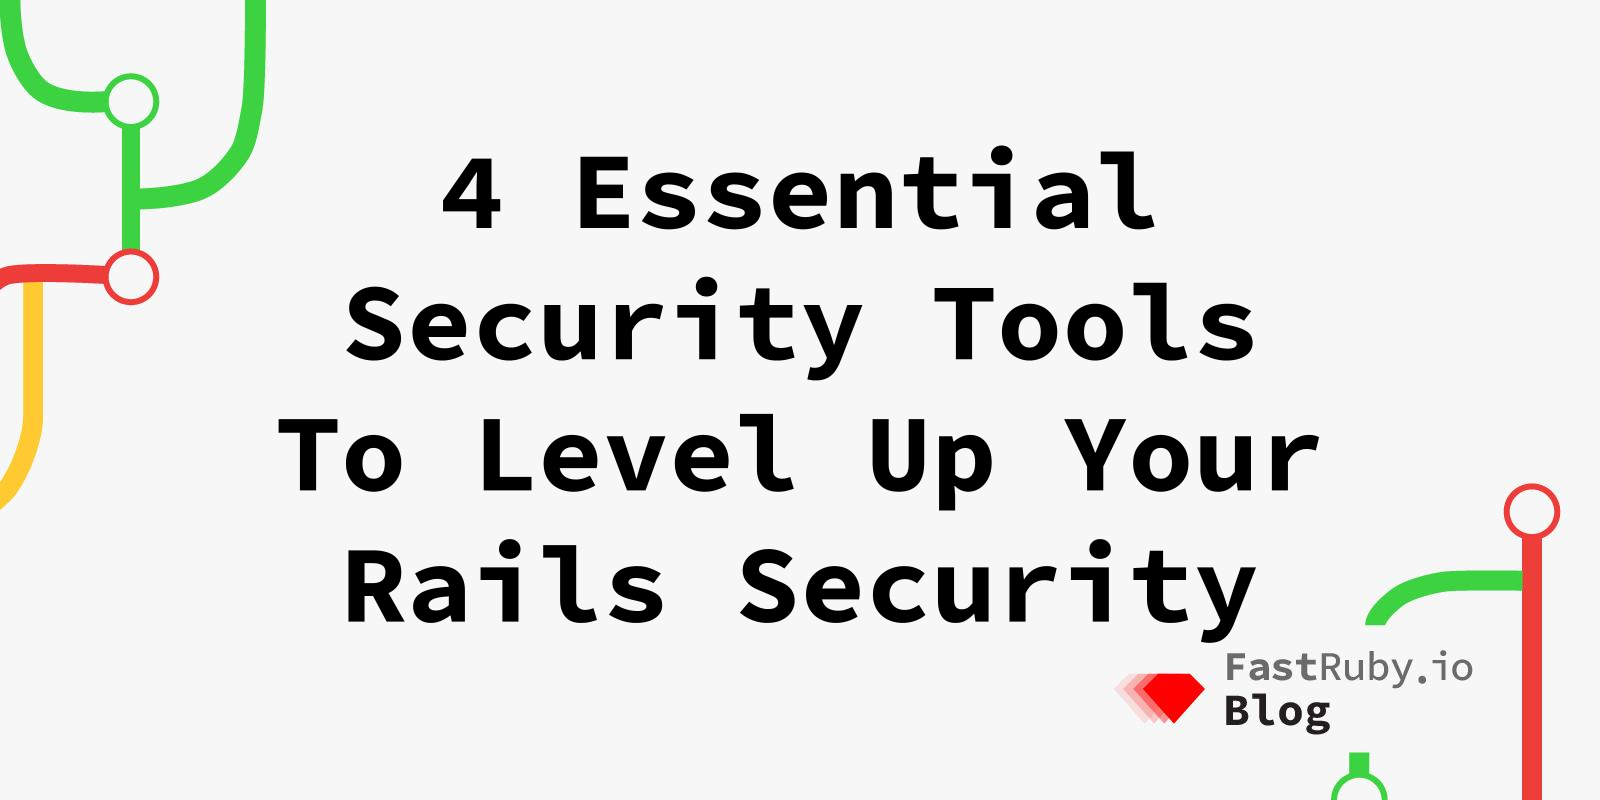 4 Essential Security Tools To Level Up Your Rails Security